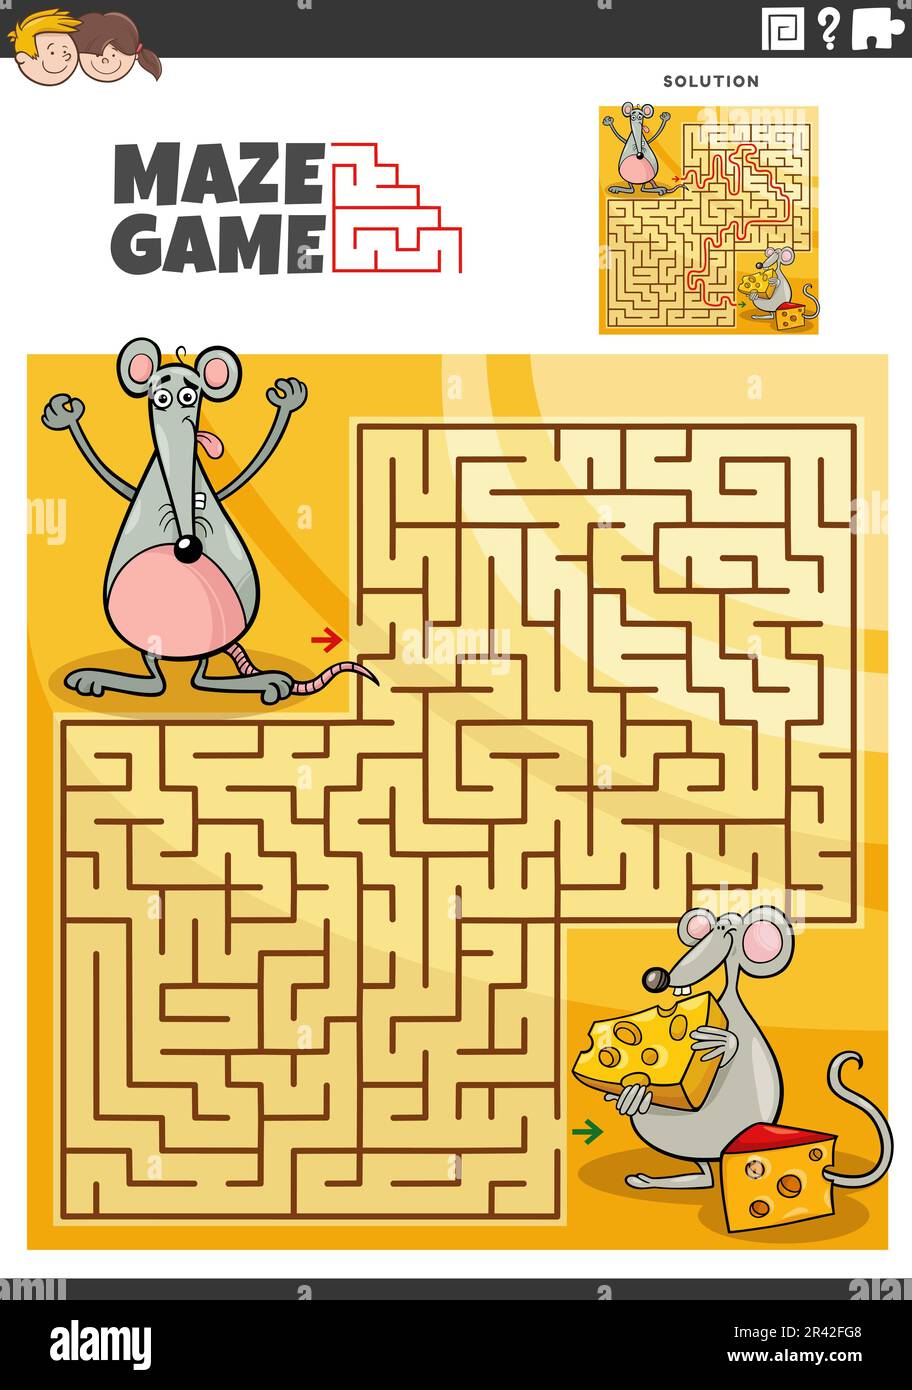 Maze game activity with cartoon mice characters with cheese Stock Photo